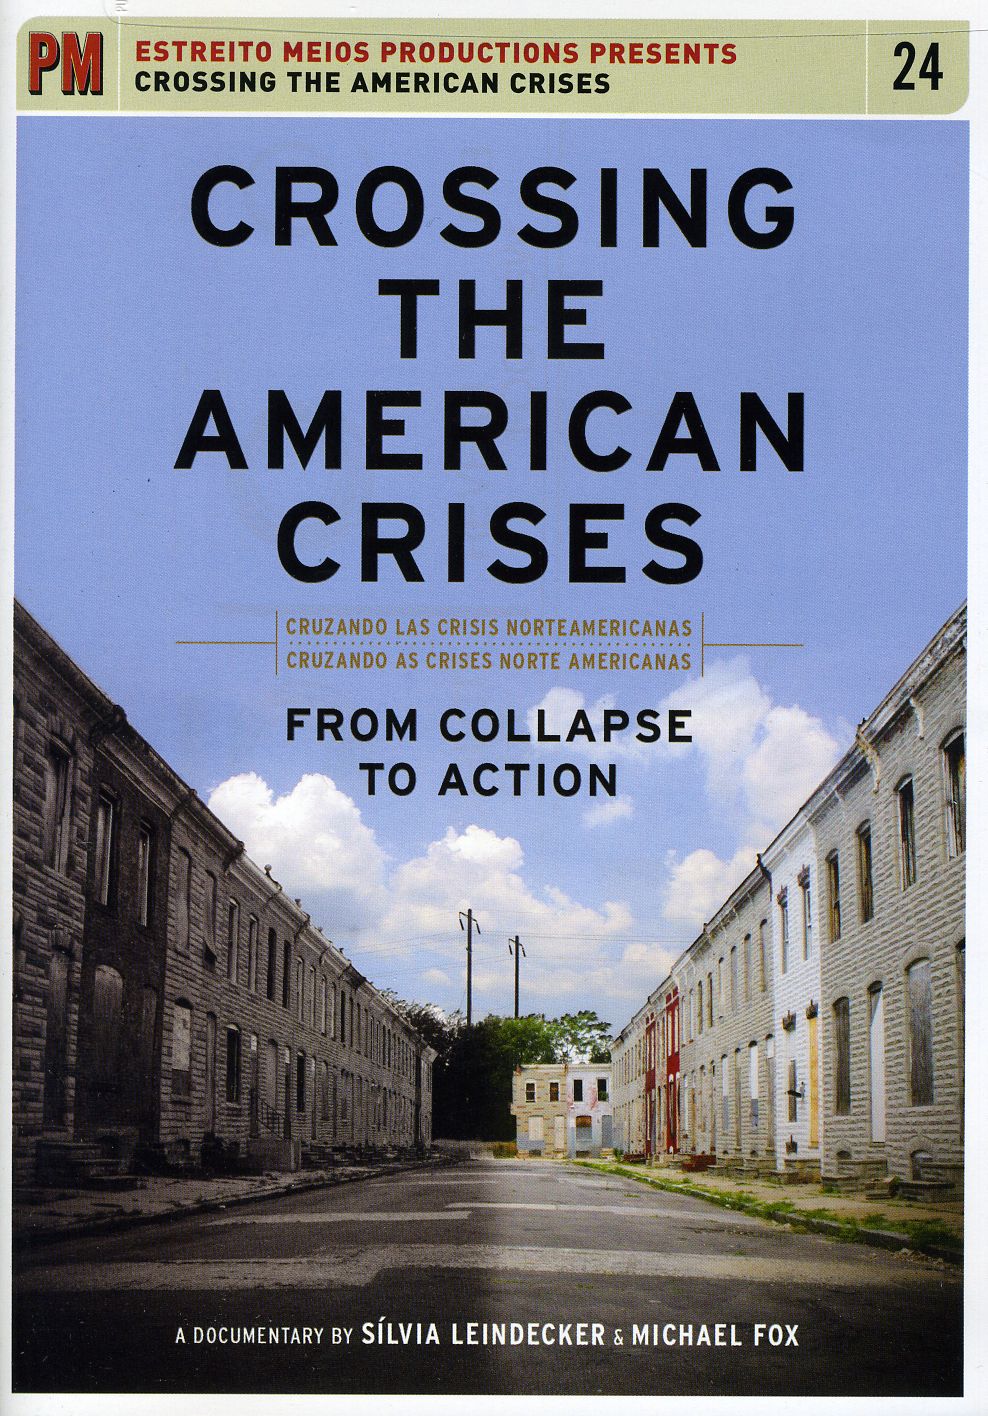 CROSSING THE AMERICAN CRISES: FROM COLLAPSE TO